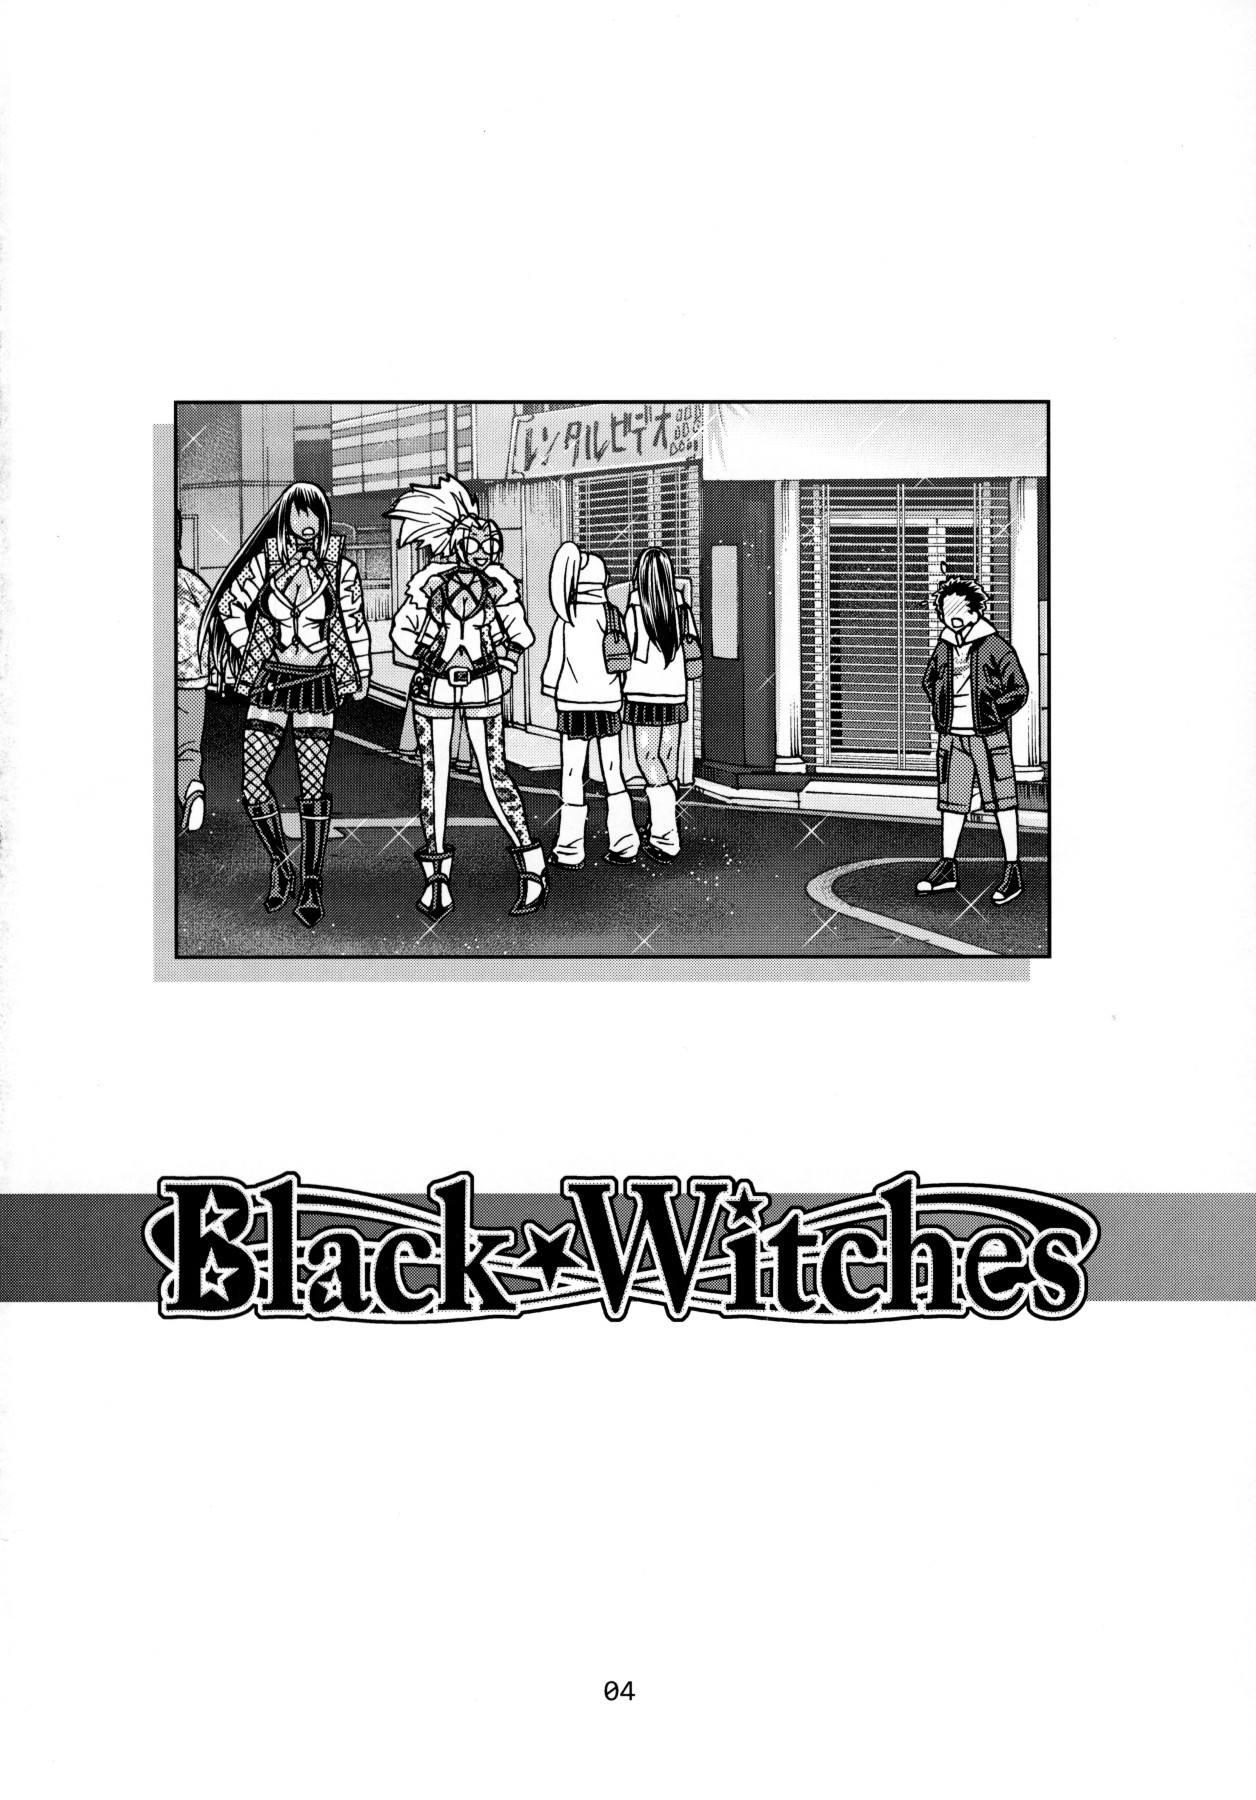 (C97) [CELLULOID-ACME (チバトシロウ)] Black Witches 3 [英訳]